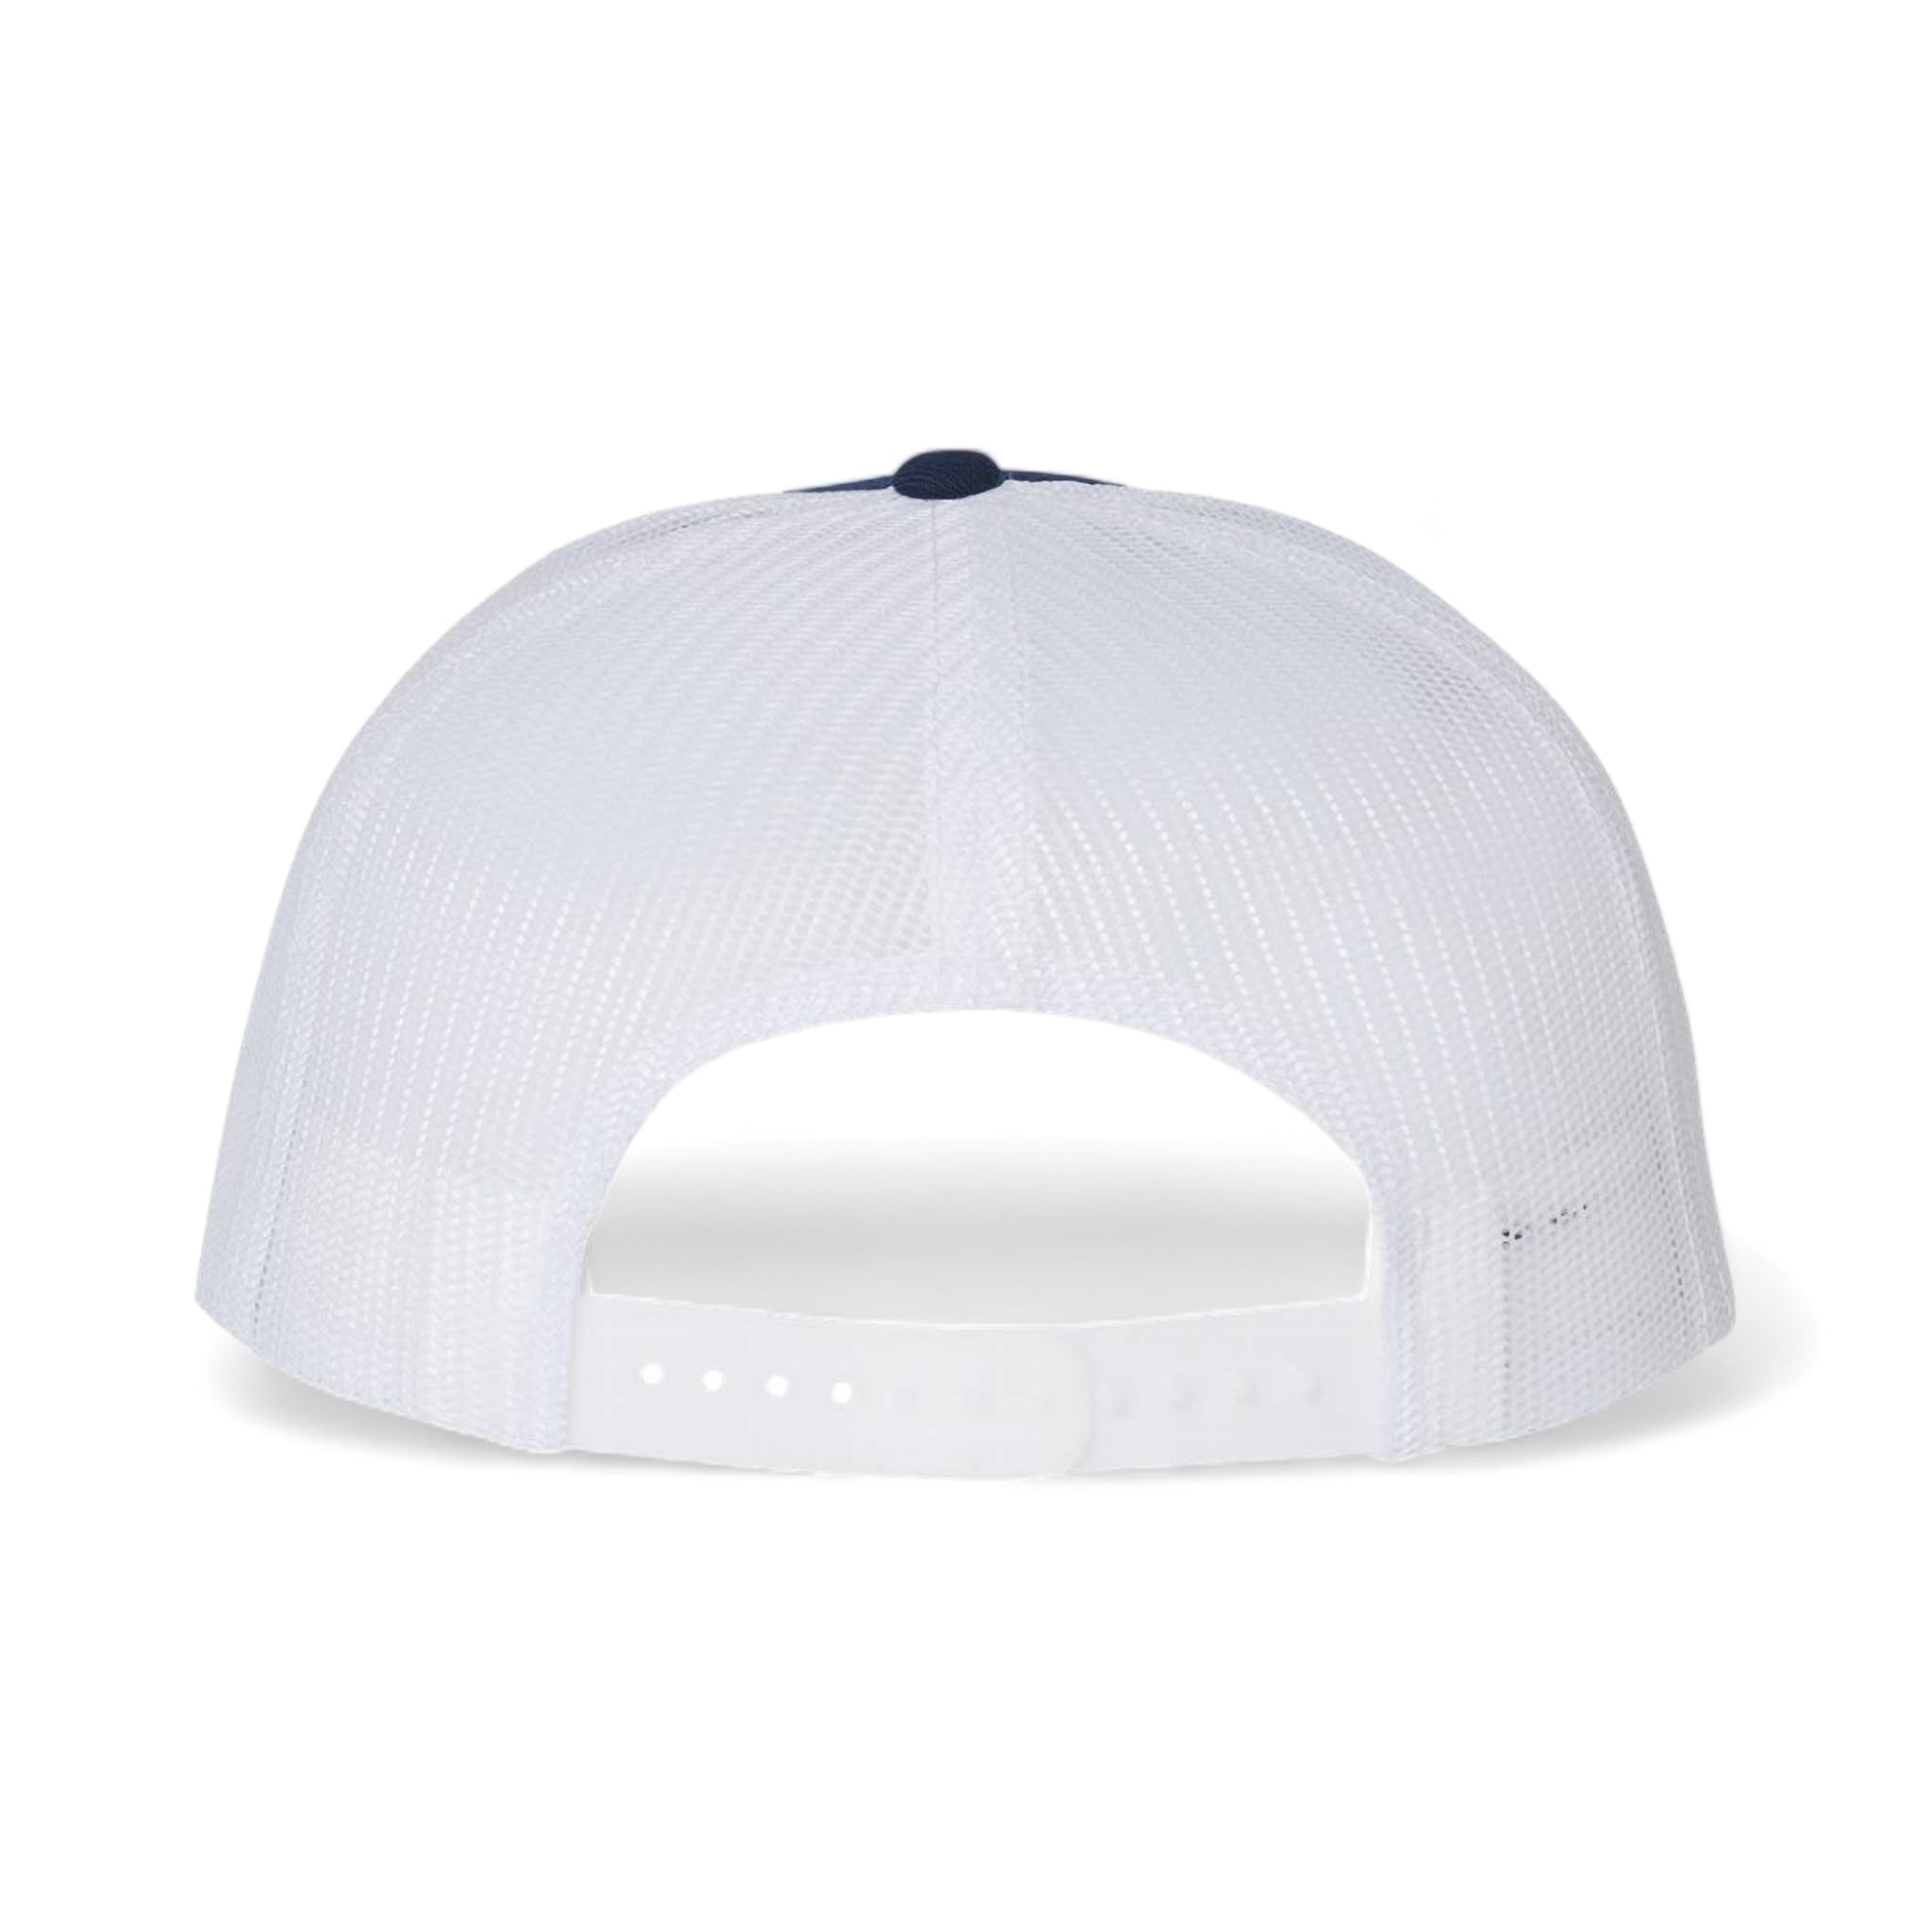 Back view of Richardson 511 custom hat in navy and white